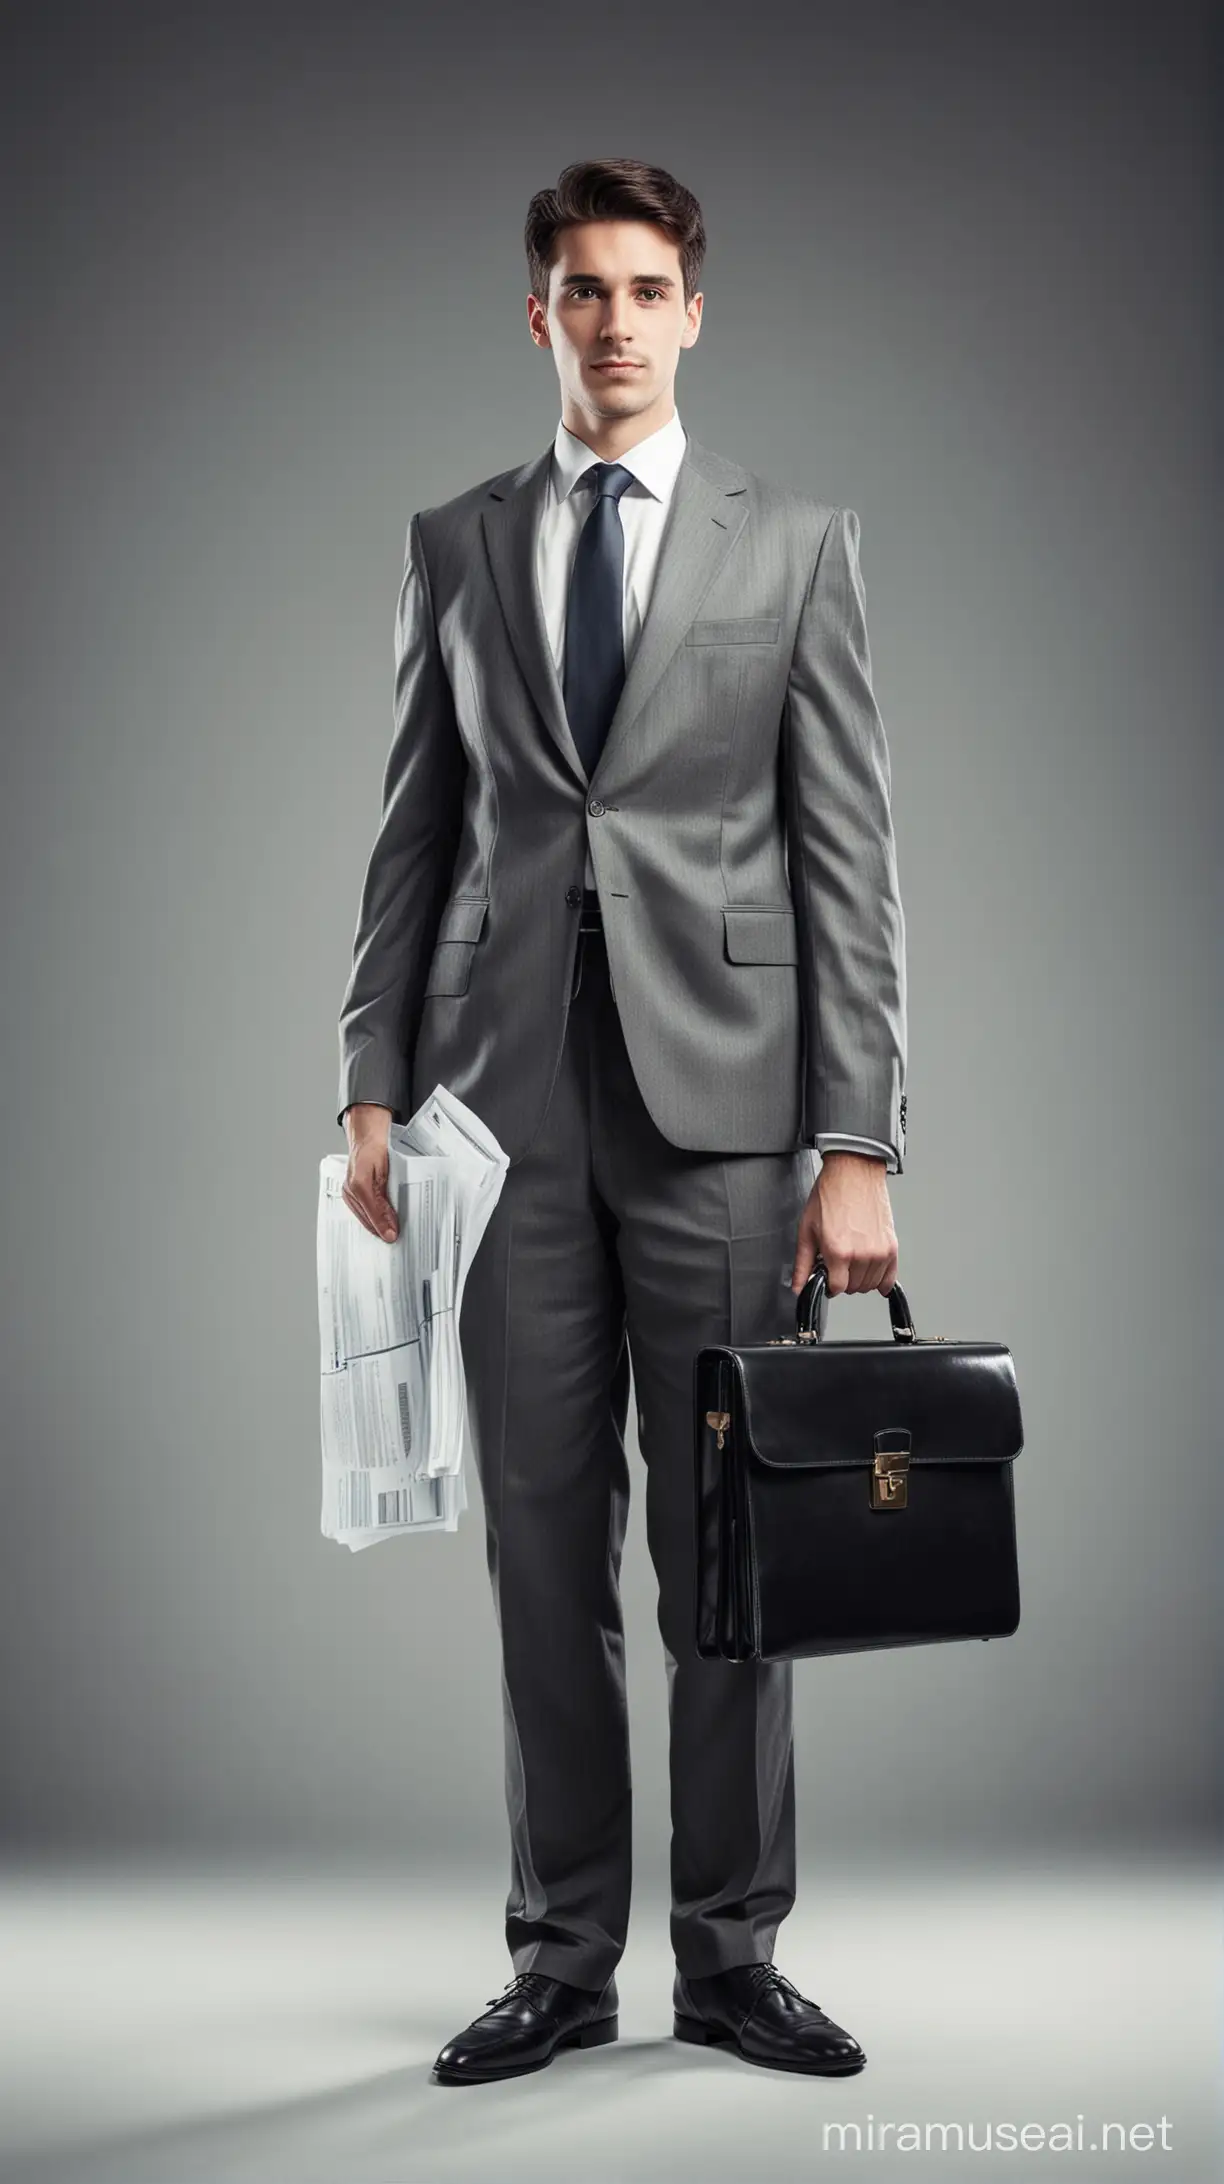 An image of a person standing confidently with a briefcase or financial documents, symbolizing financial empowerment and success.